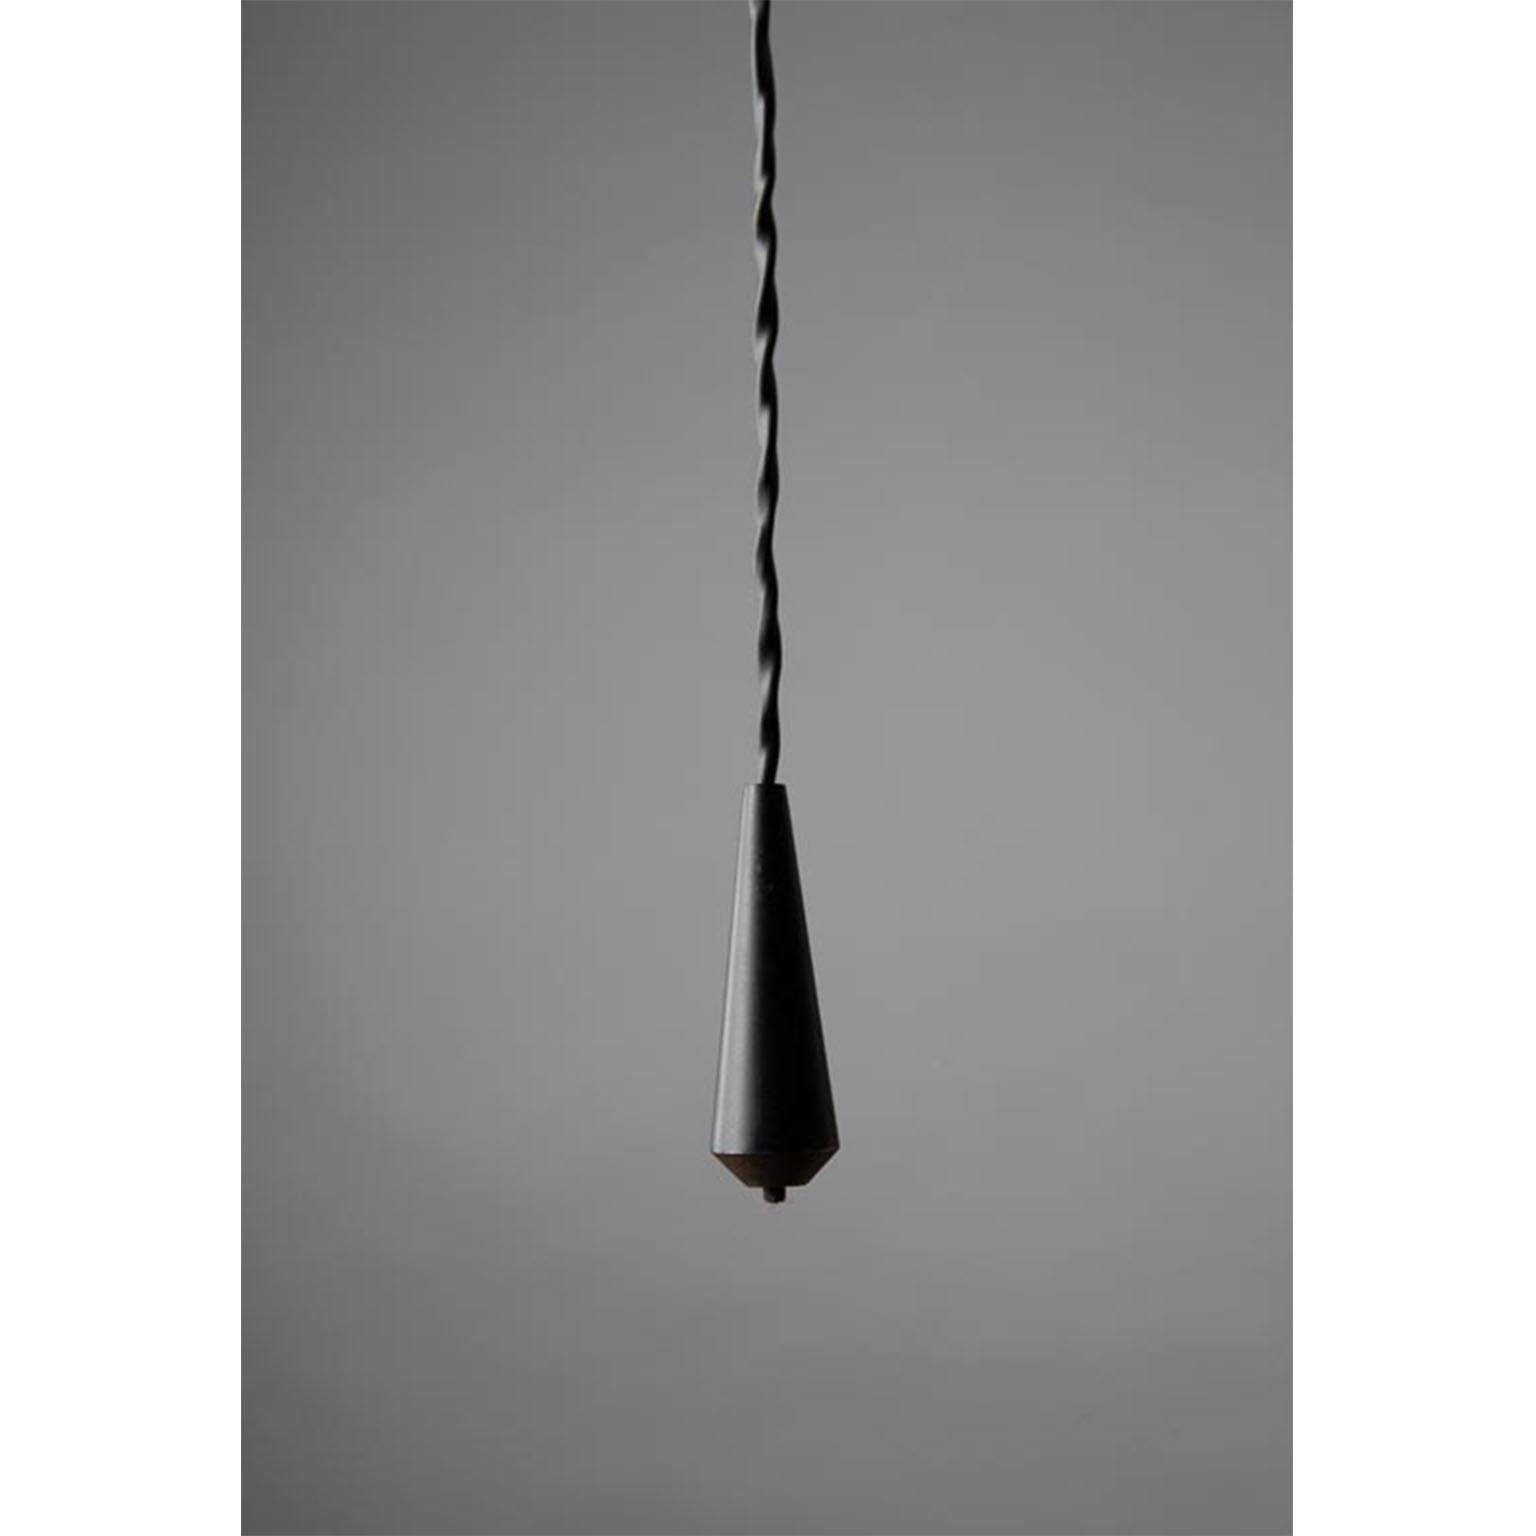 Note: This is standard suspension, for the full-swing version.

Our colored limpid light size large is a pendant light, decorative light made in Europe.
The Limpid Lights collection, a series of lighting objects that incorporate movement as a key